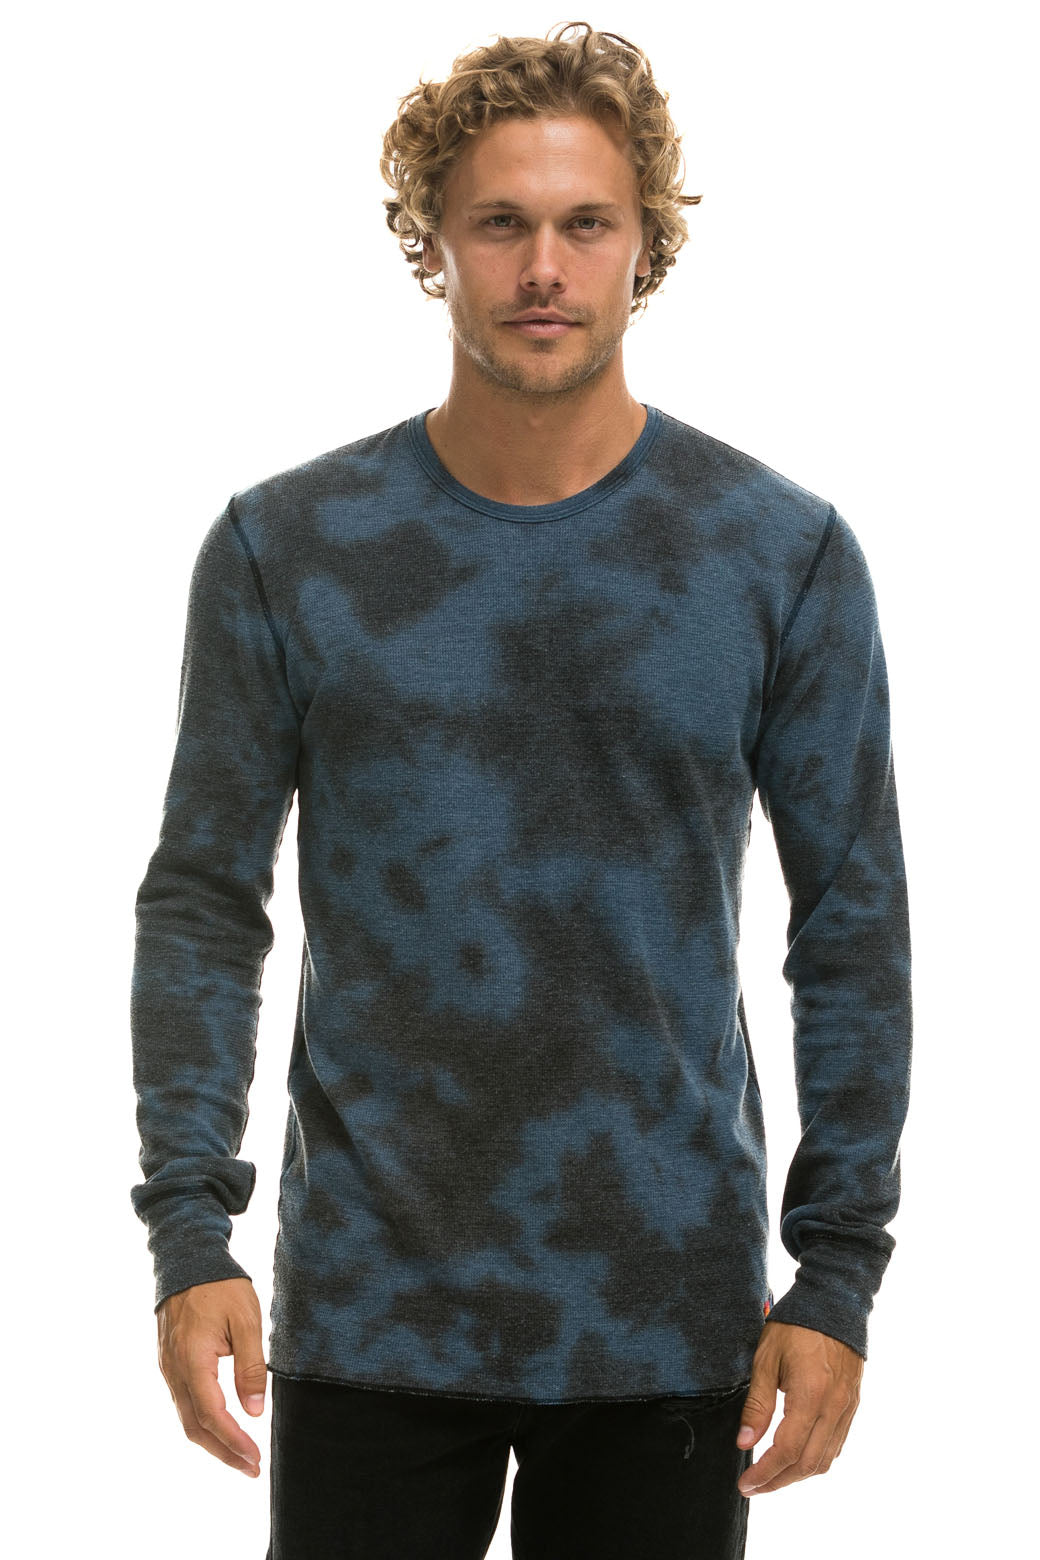 HAND DYED THERMAL - TIE DYE BLUE BLACK Thermal Aviator Nation 